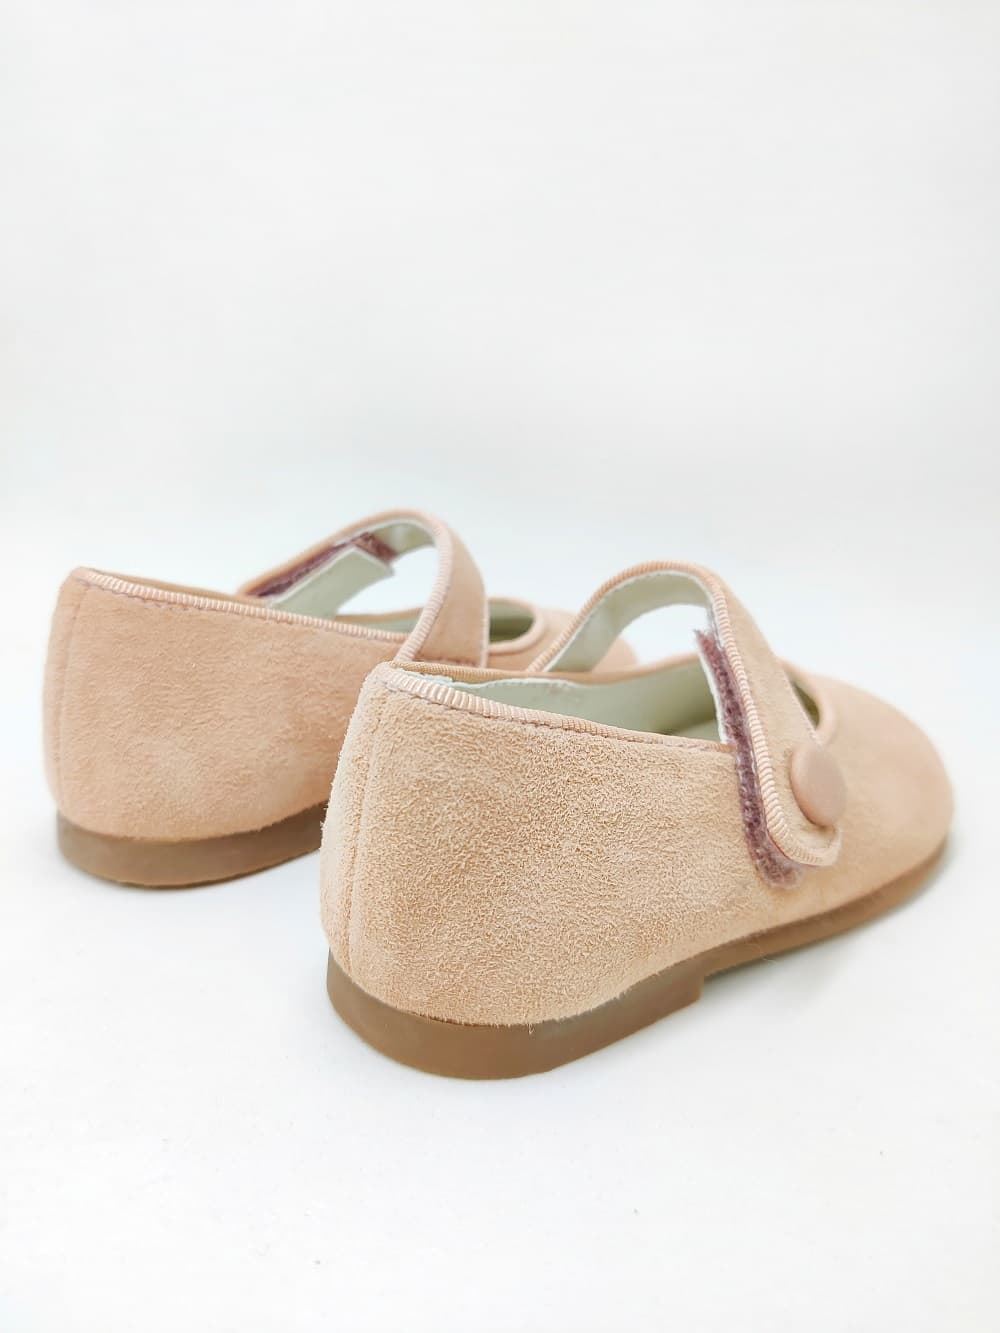 Pirufin (Piruflex) Mary Janes for baby girls in Pale Pink suede - Image 3